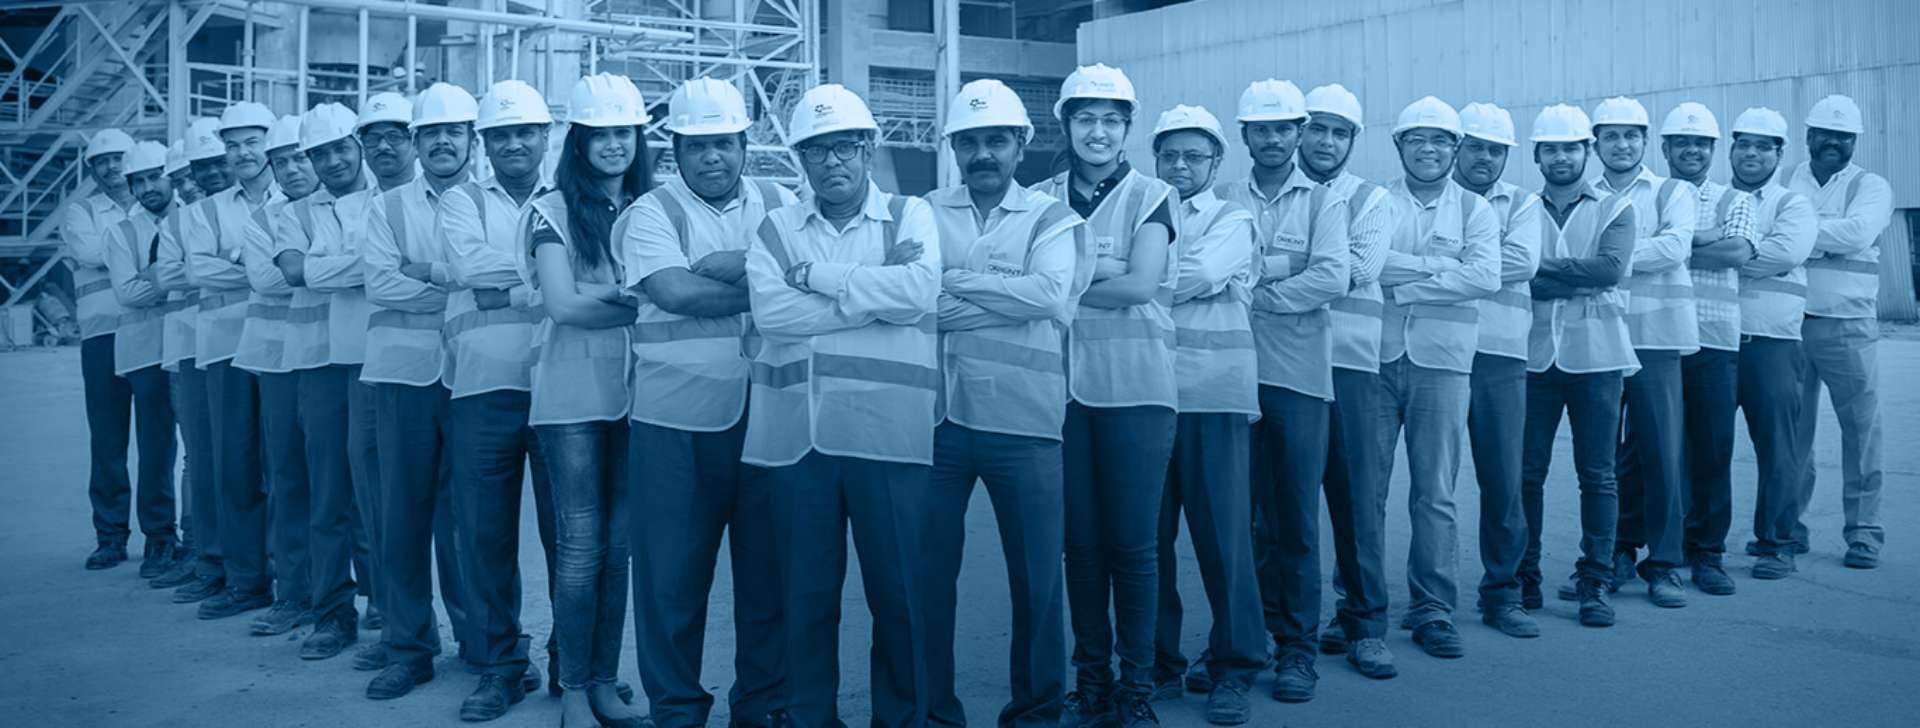 Work Life at Orient Cement | Orient Cement - The Leading Cement